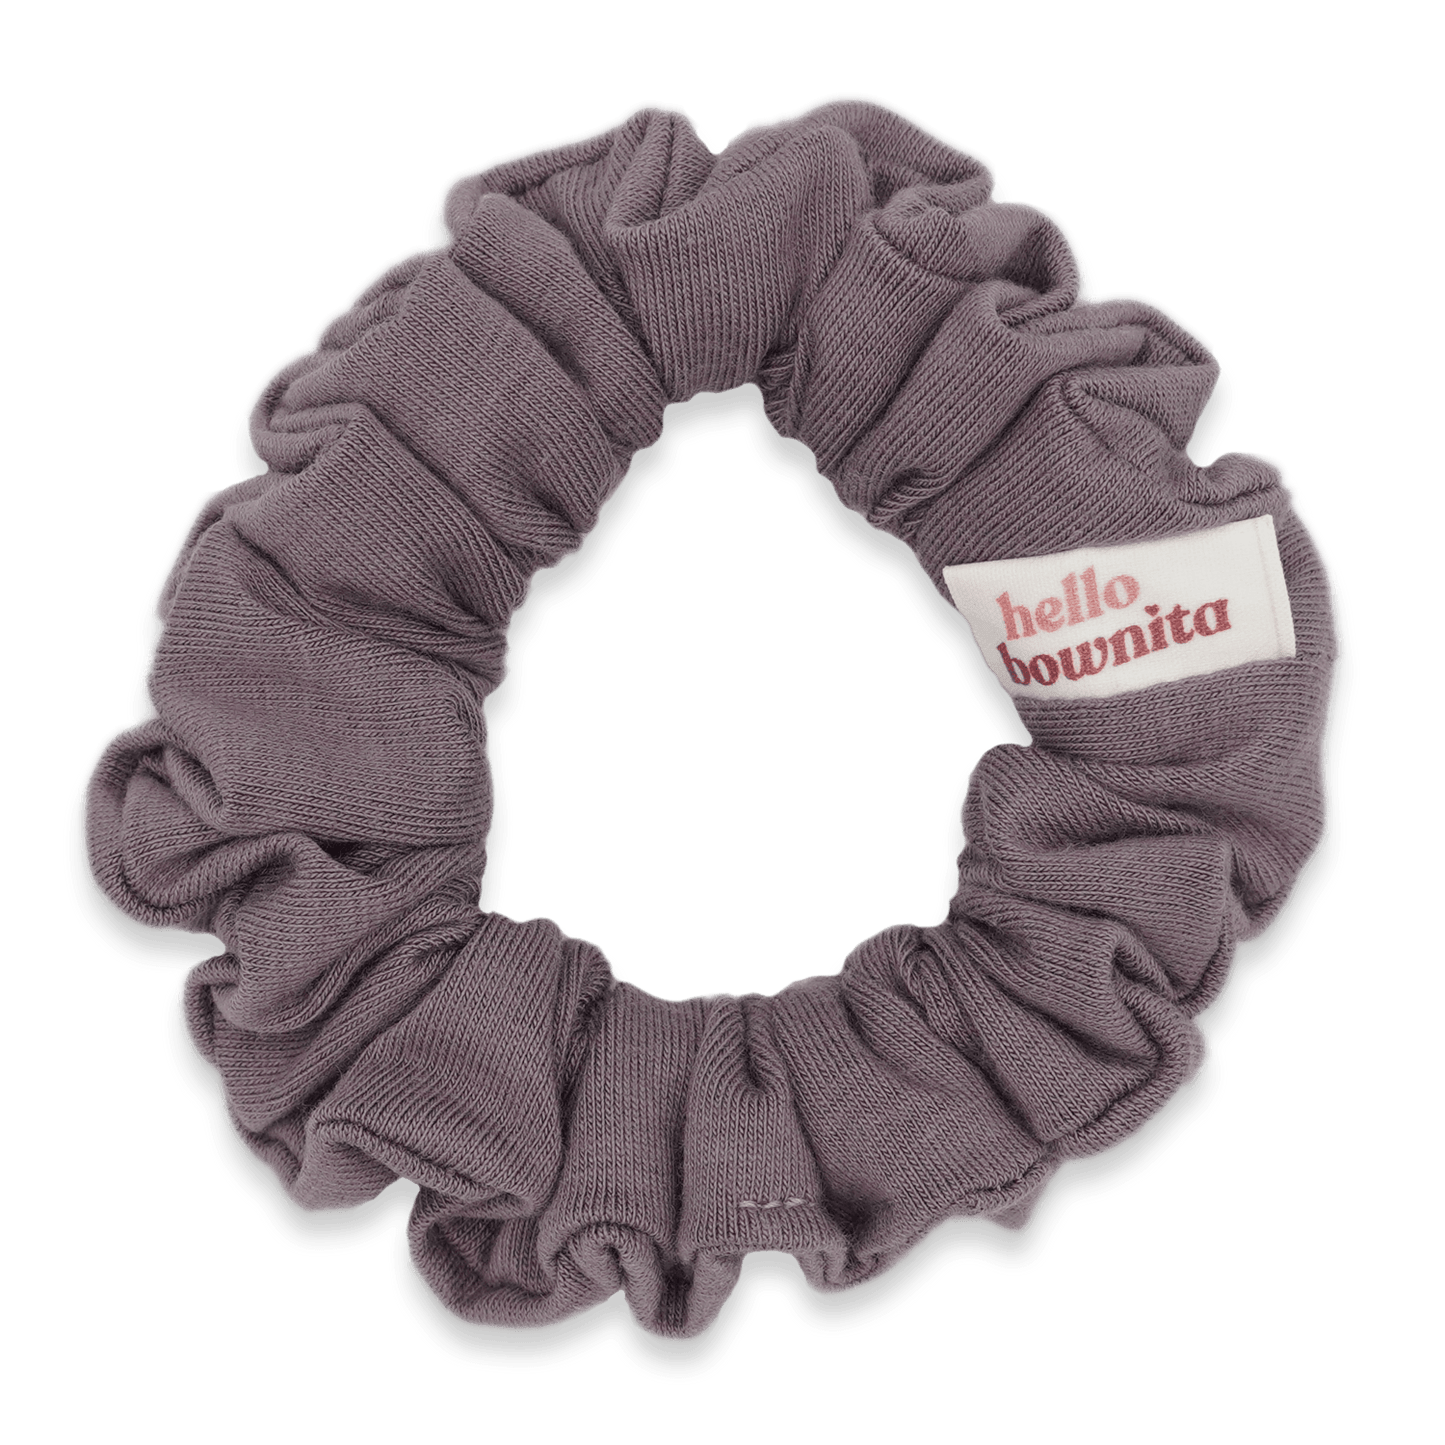 Grape Scrunchie | Everyday Collection